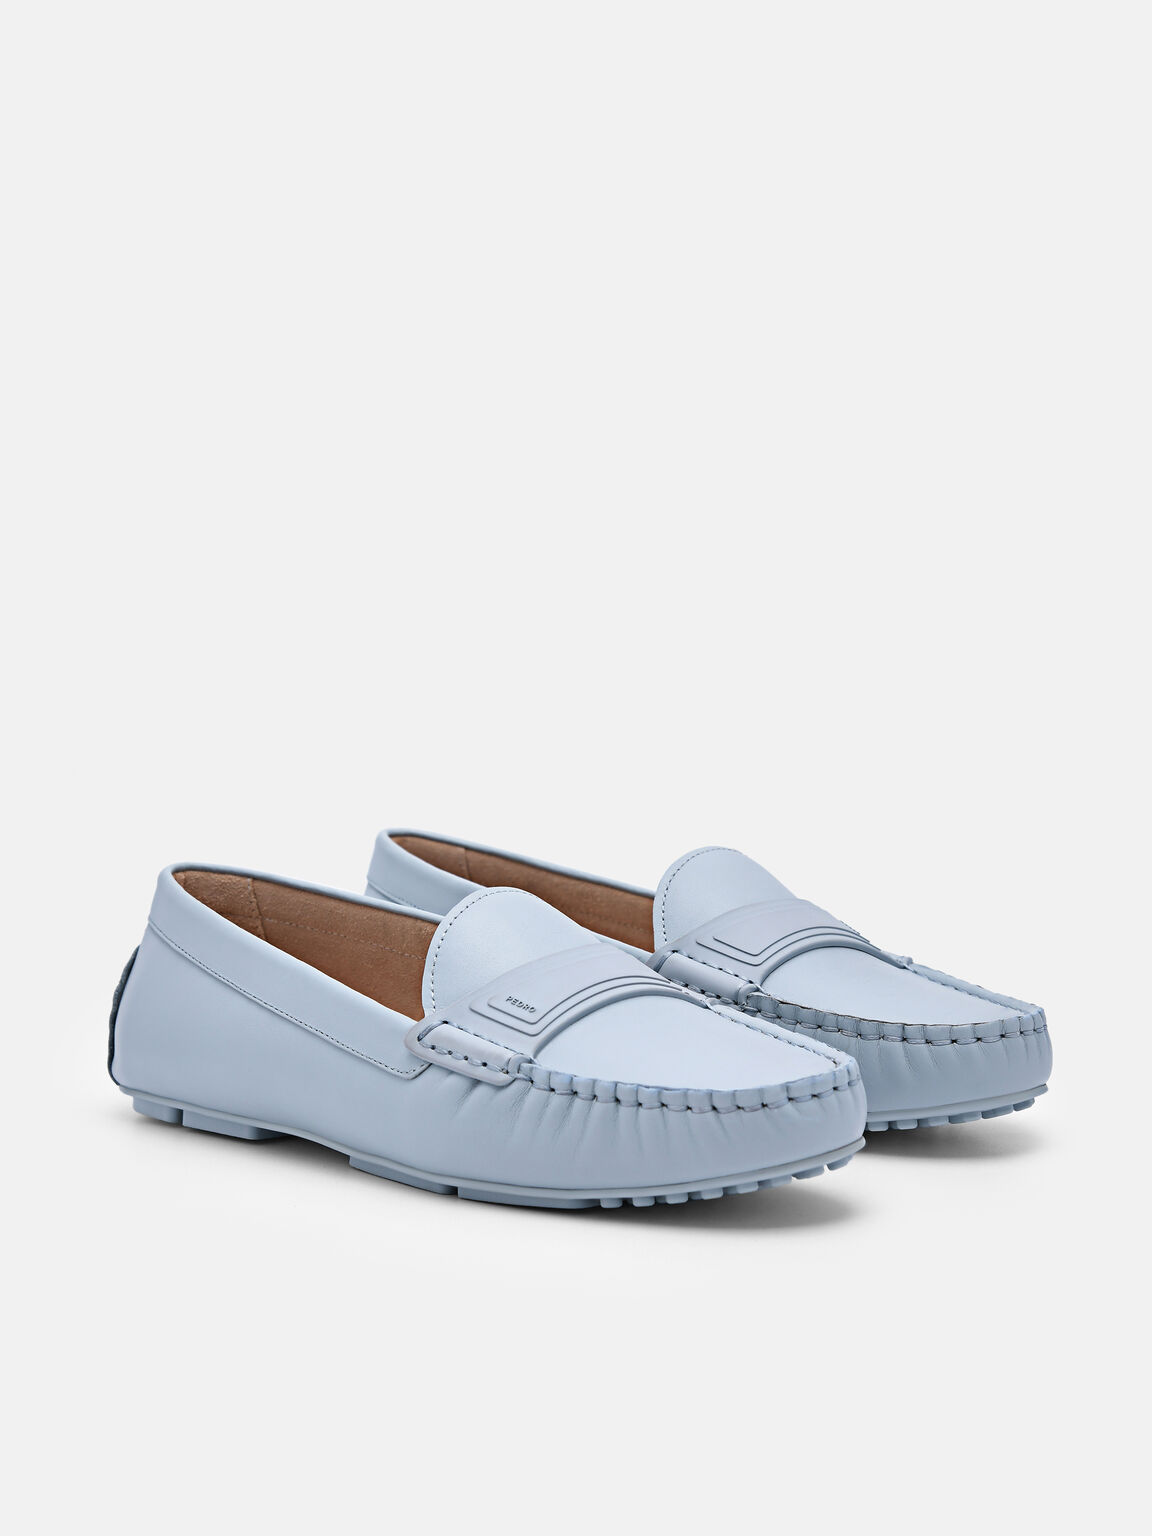 Tessa Leather Driving Shoes, Light Blue